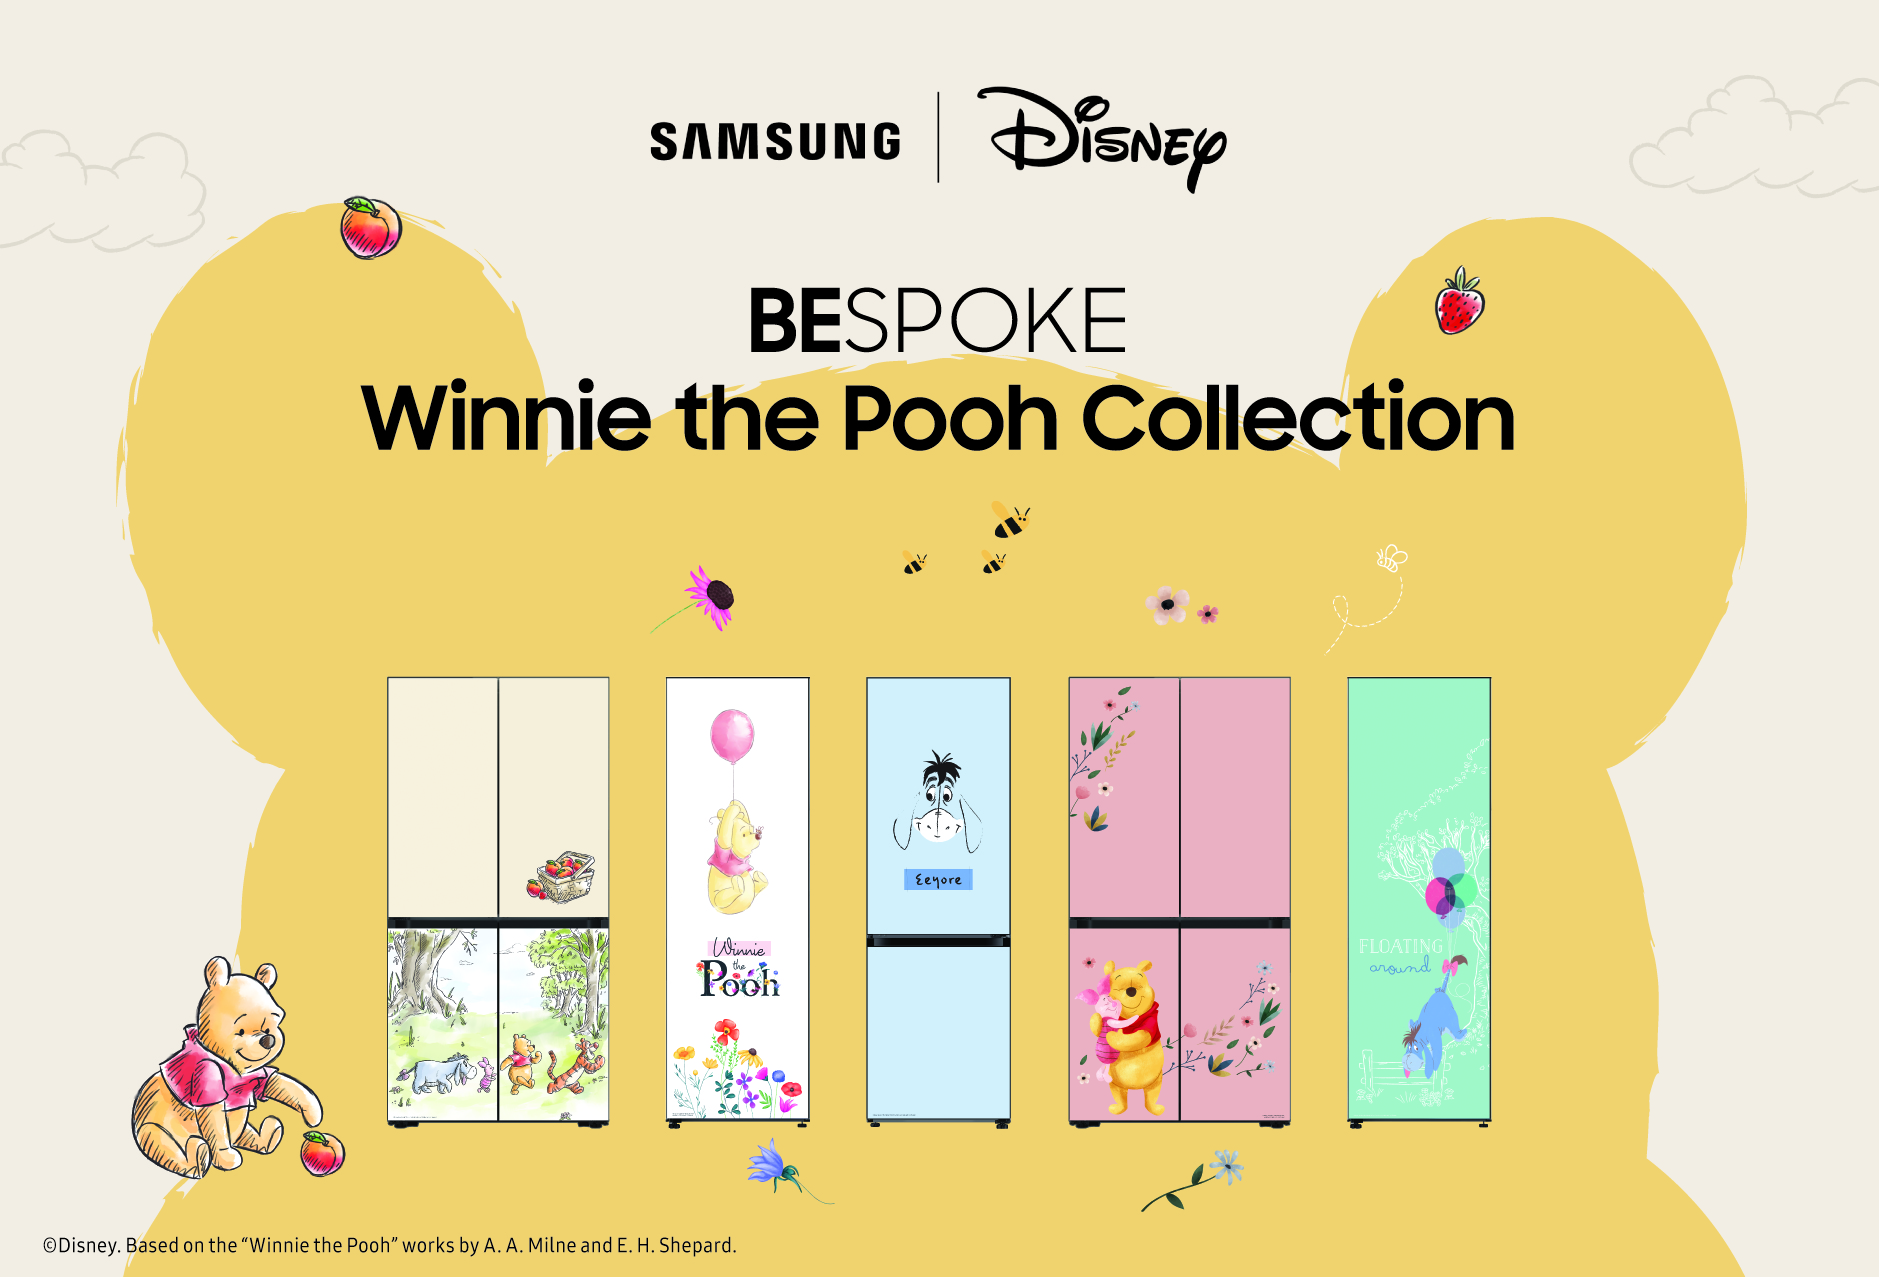 Bespoke Winnie the Pooh Collection